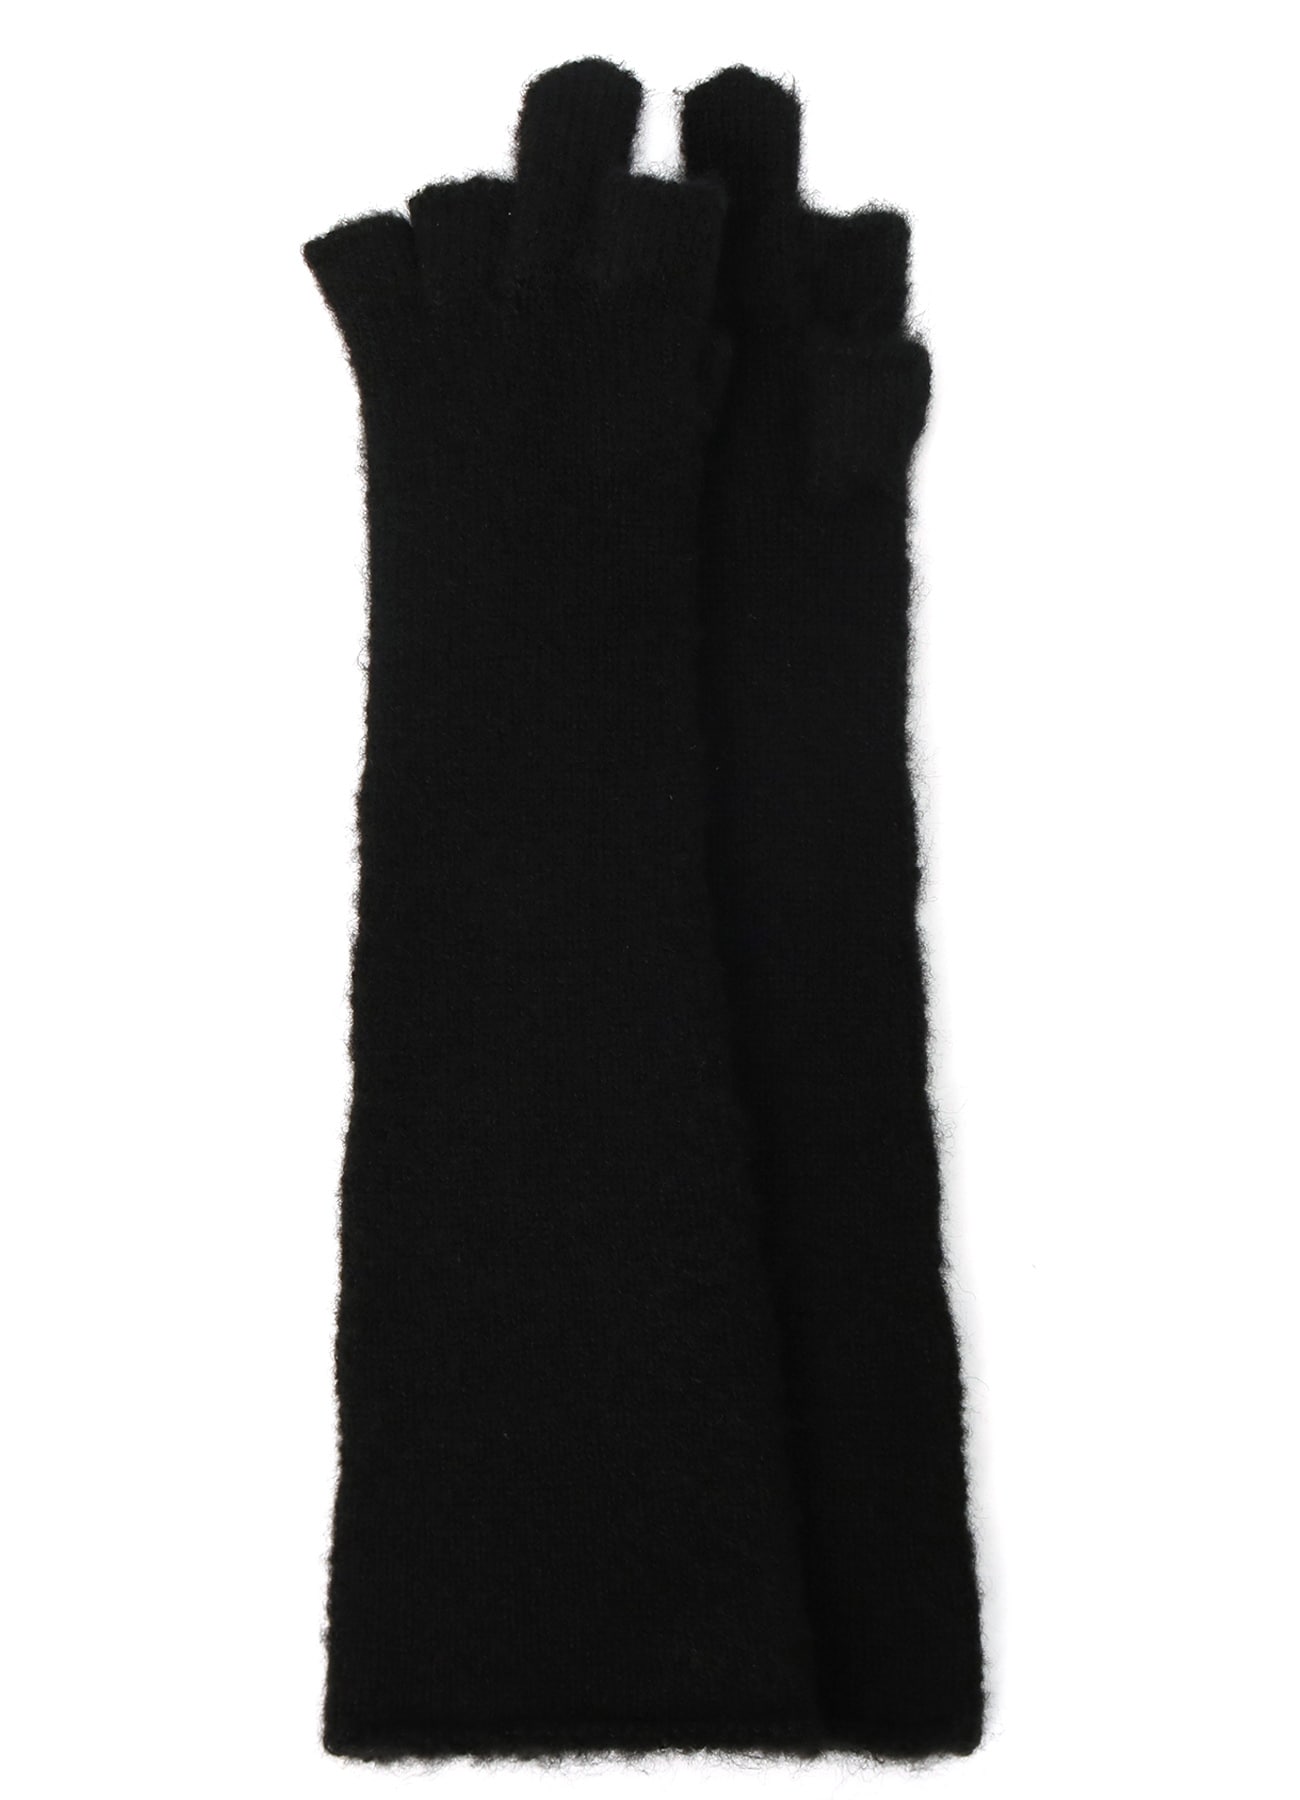 MIDDLE FINGER GLOVE A